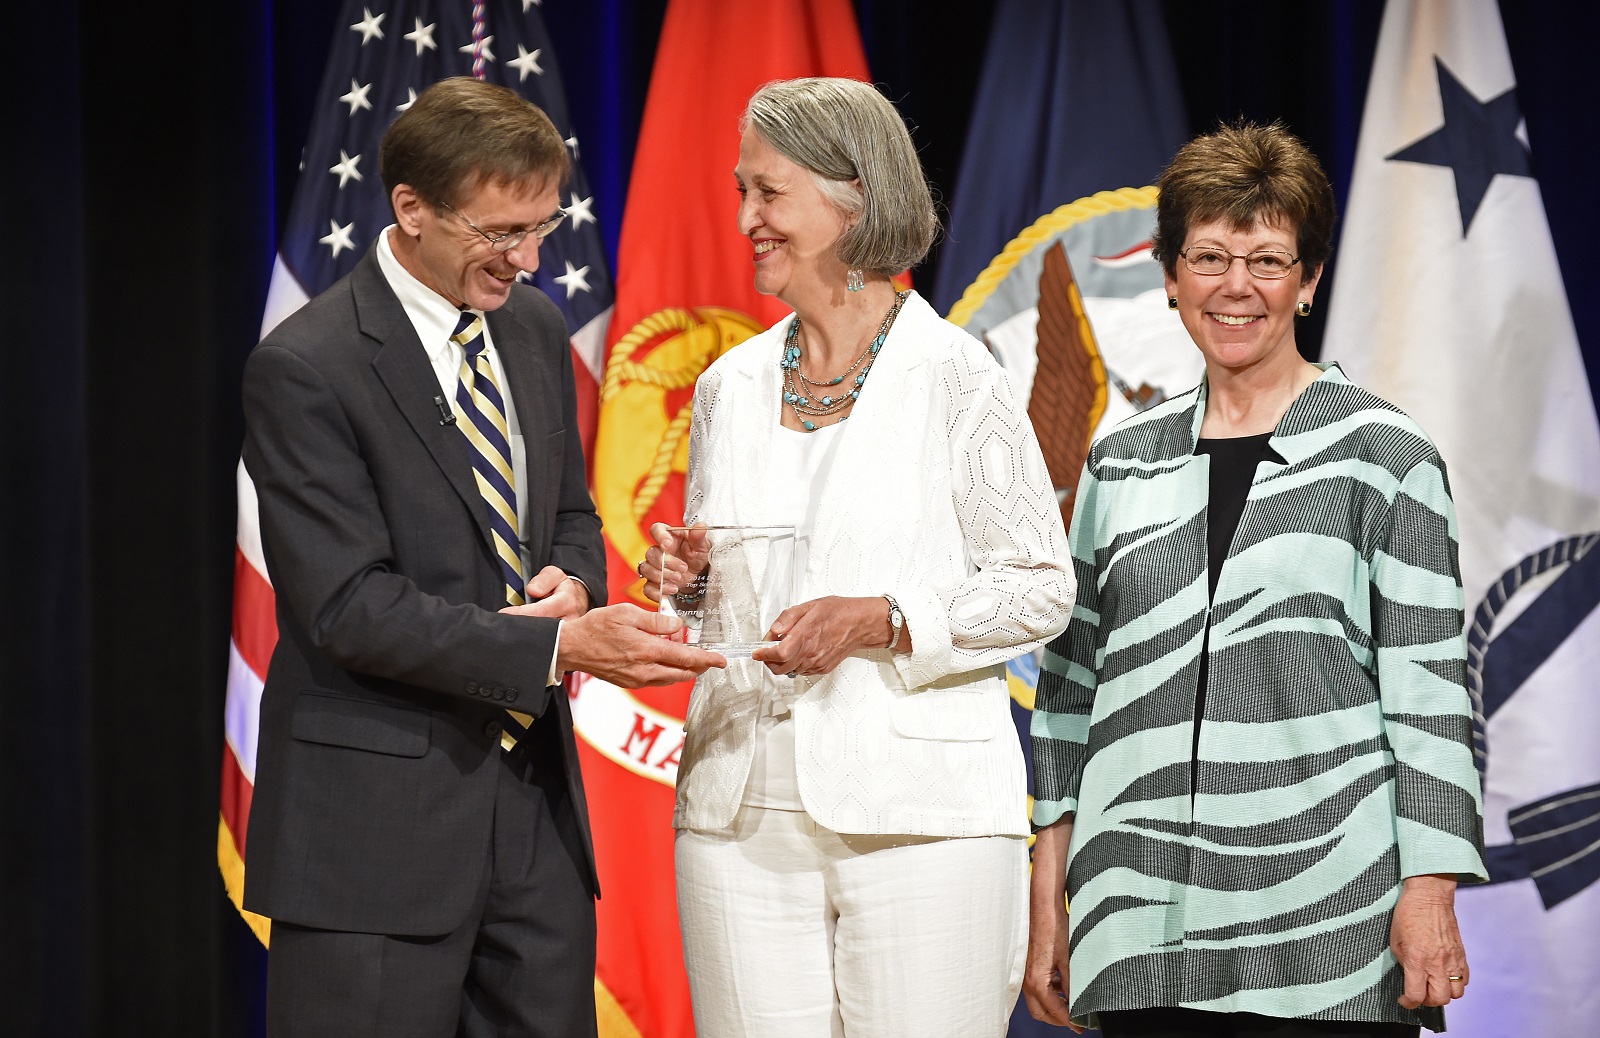 Sean J. Stackley, assistant secretary of the Navy for research development and acquisition, and Dr. Delores M. Etter present Dr. Lynne Marshall, formerly of the Naval Submarine Medical Research Laboratory, with a 2014 Dr. Delores M. Etter Top Scientists and Engineers Award. Until her retirement, Marshall was a long-time principal investigator supported by the Office of Naval Research Noise-Induced Hearing Loss Program for her work in the area of otoacoustic emissions. U.S. Navy photo by John F. Williams.